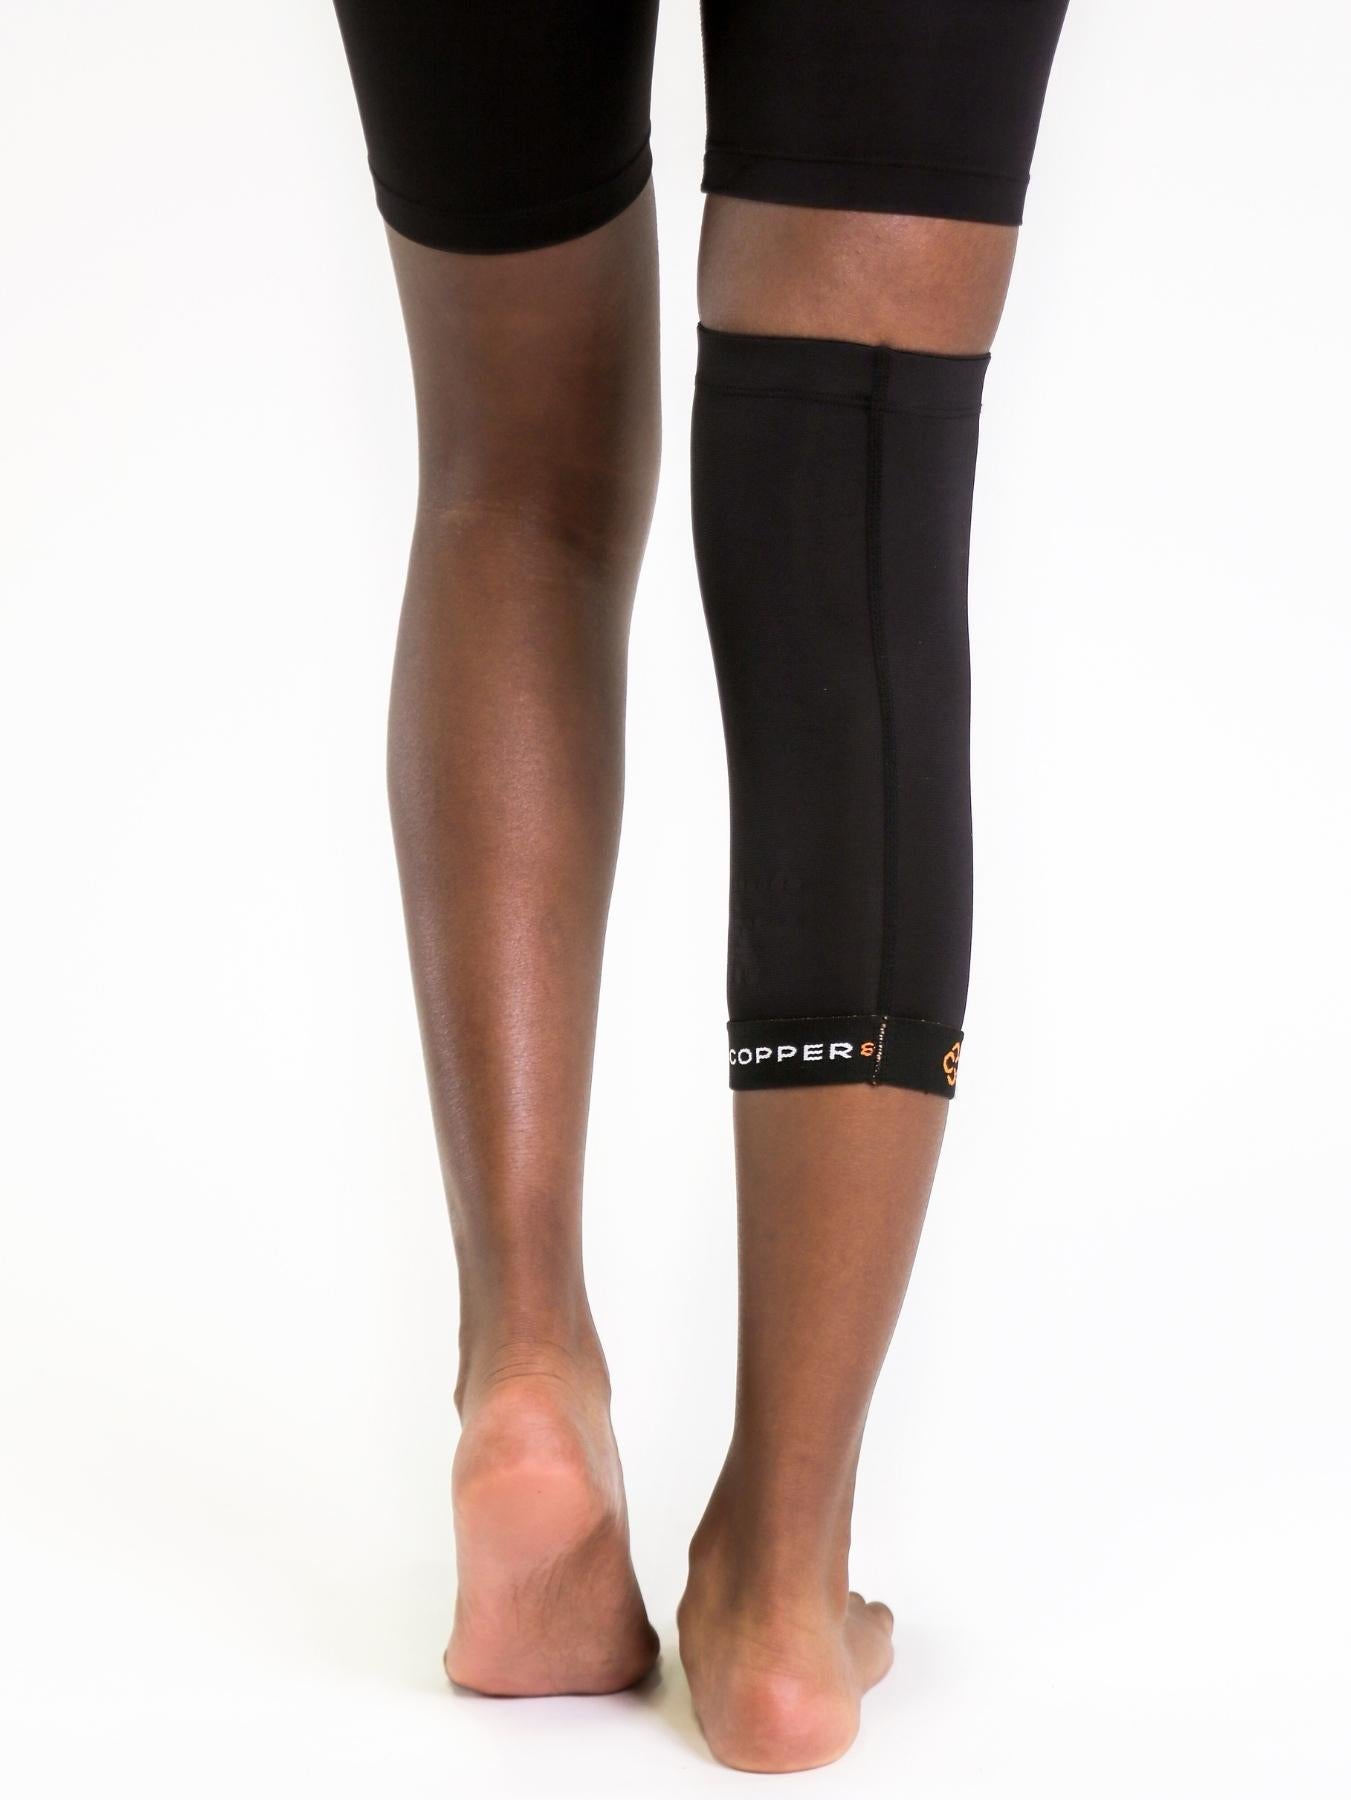 Copper Knee Sleeve  Shop Copper-Infused Compression Knee